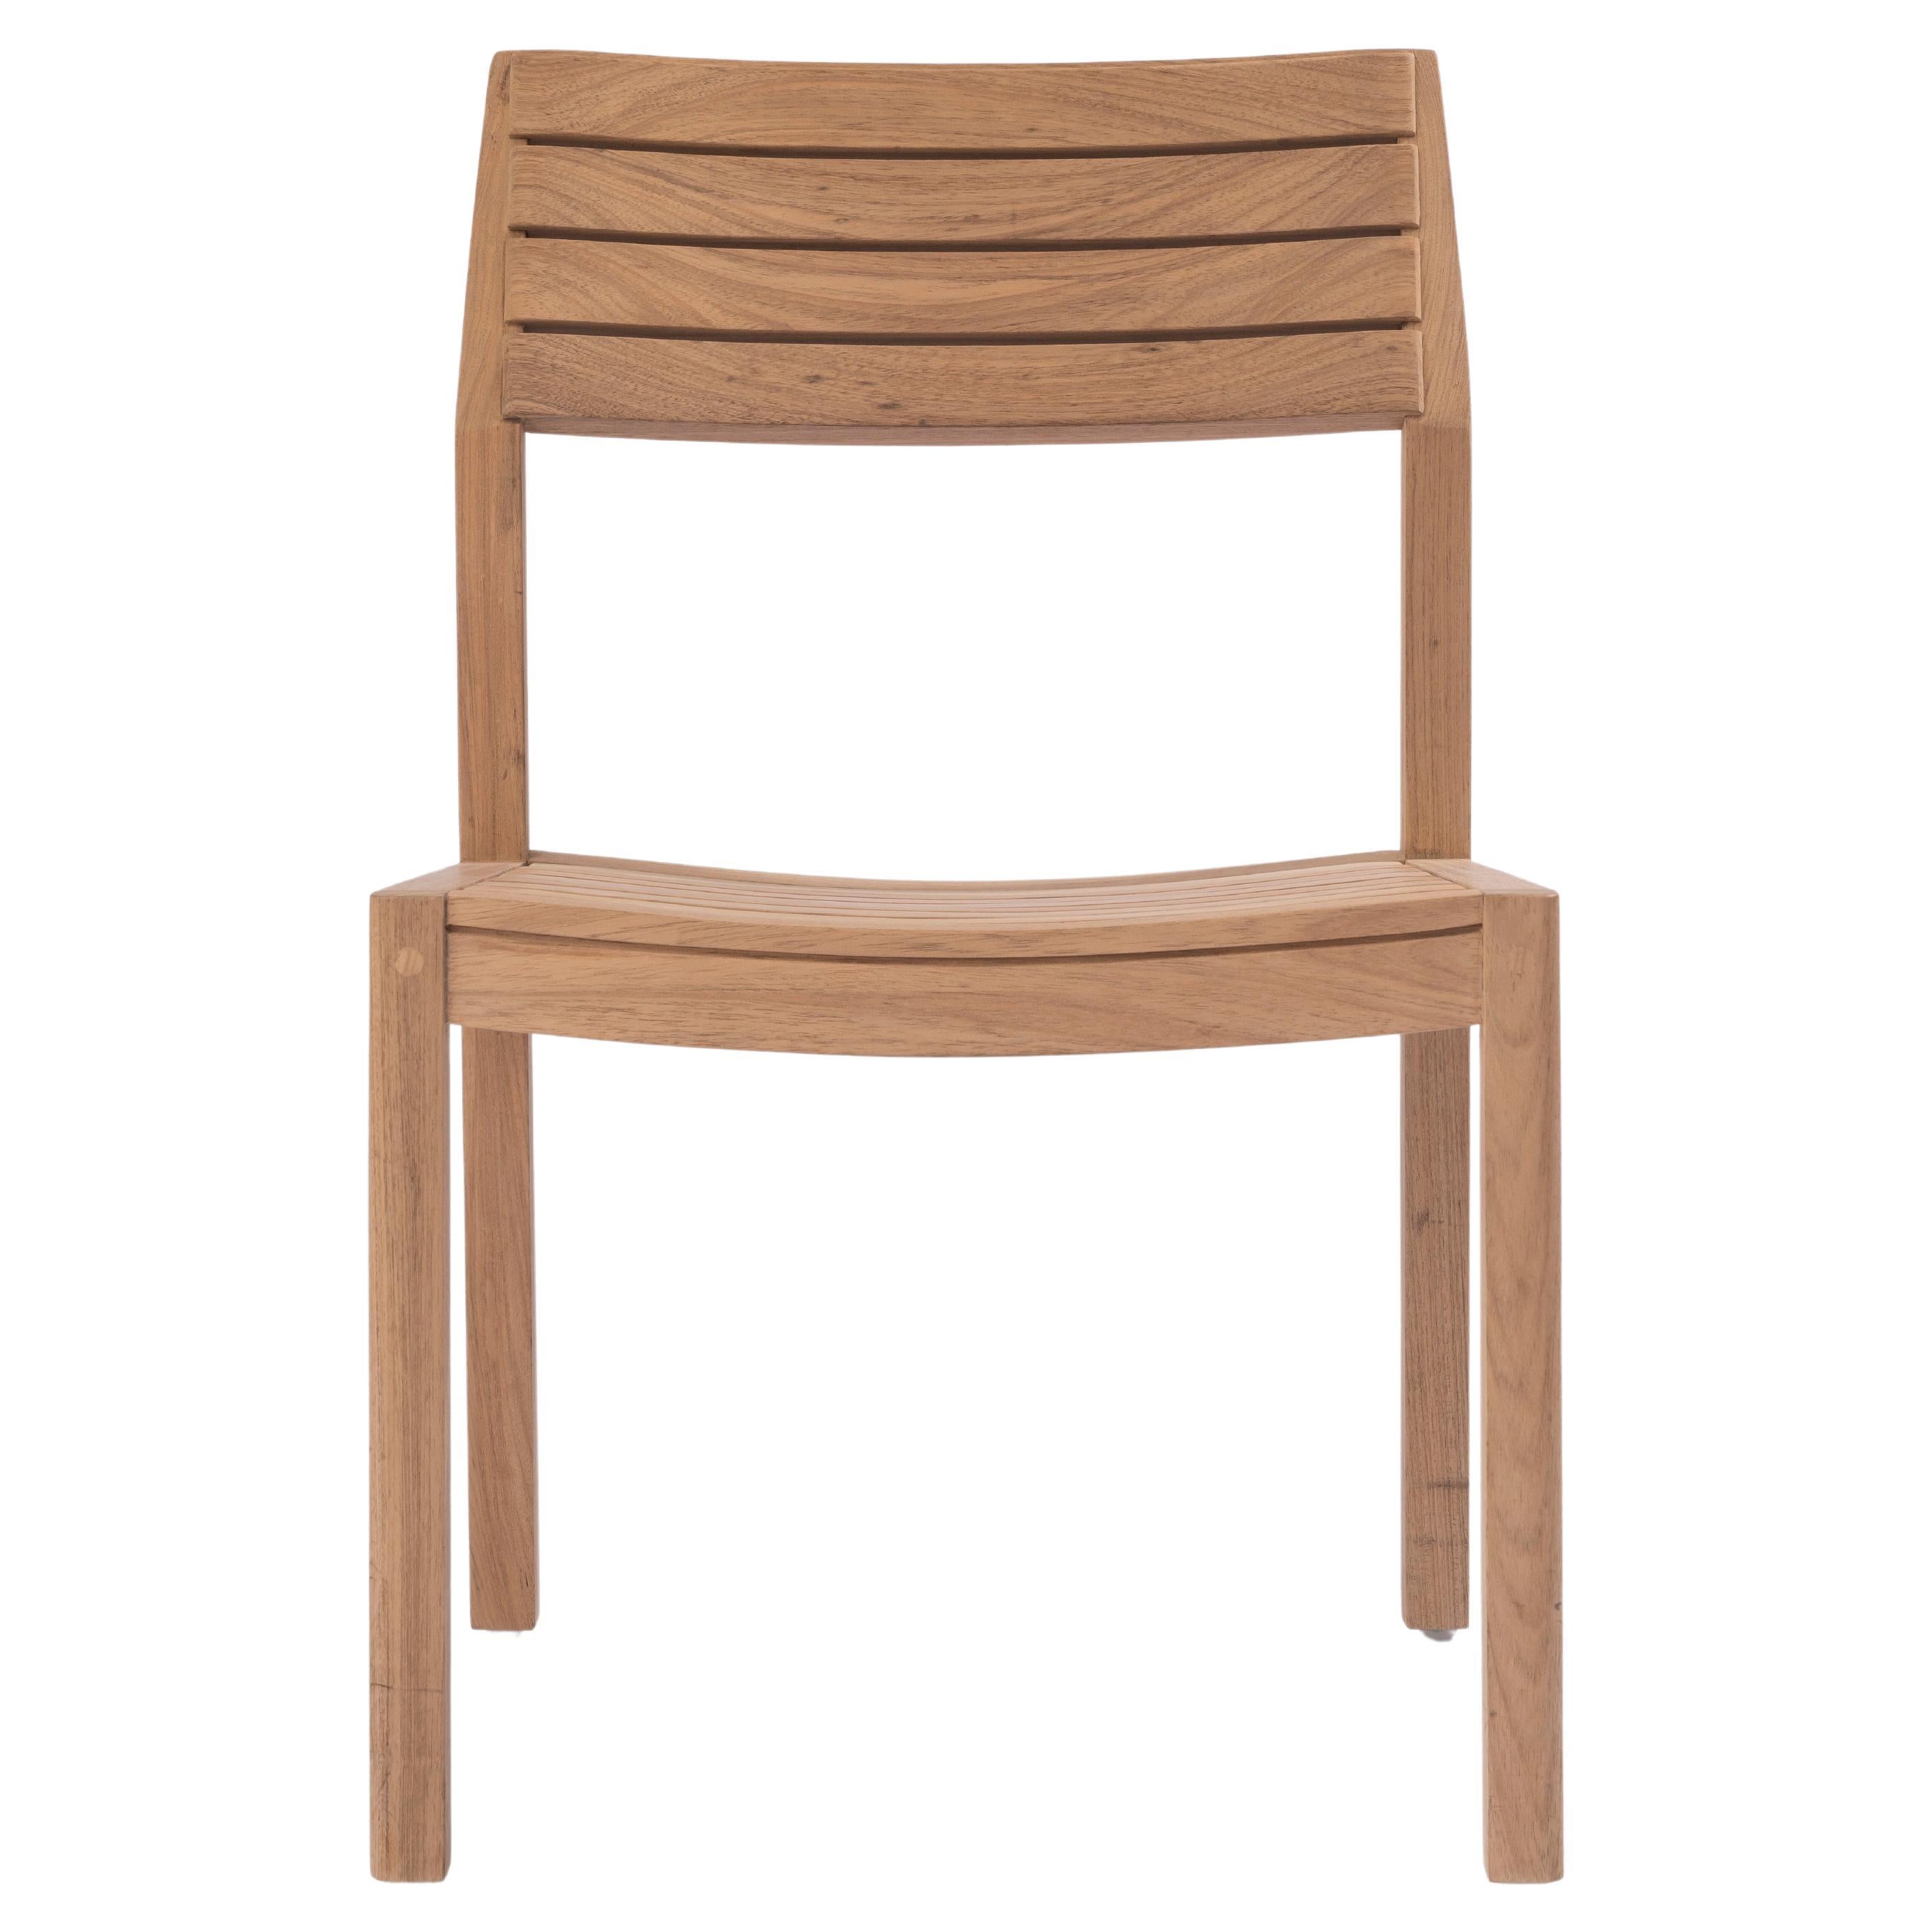 Solid Wood Chair in Teak, with Wooden Slats, for the Outside, Outdoor Resistant 